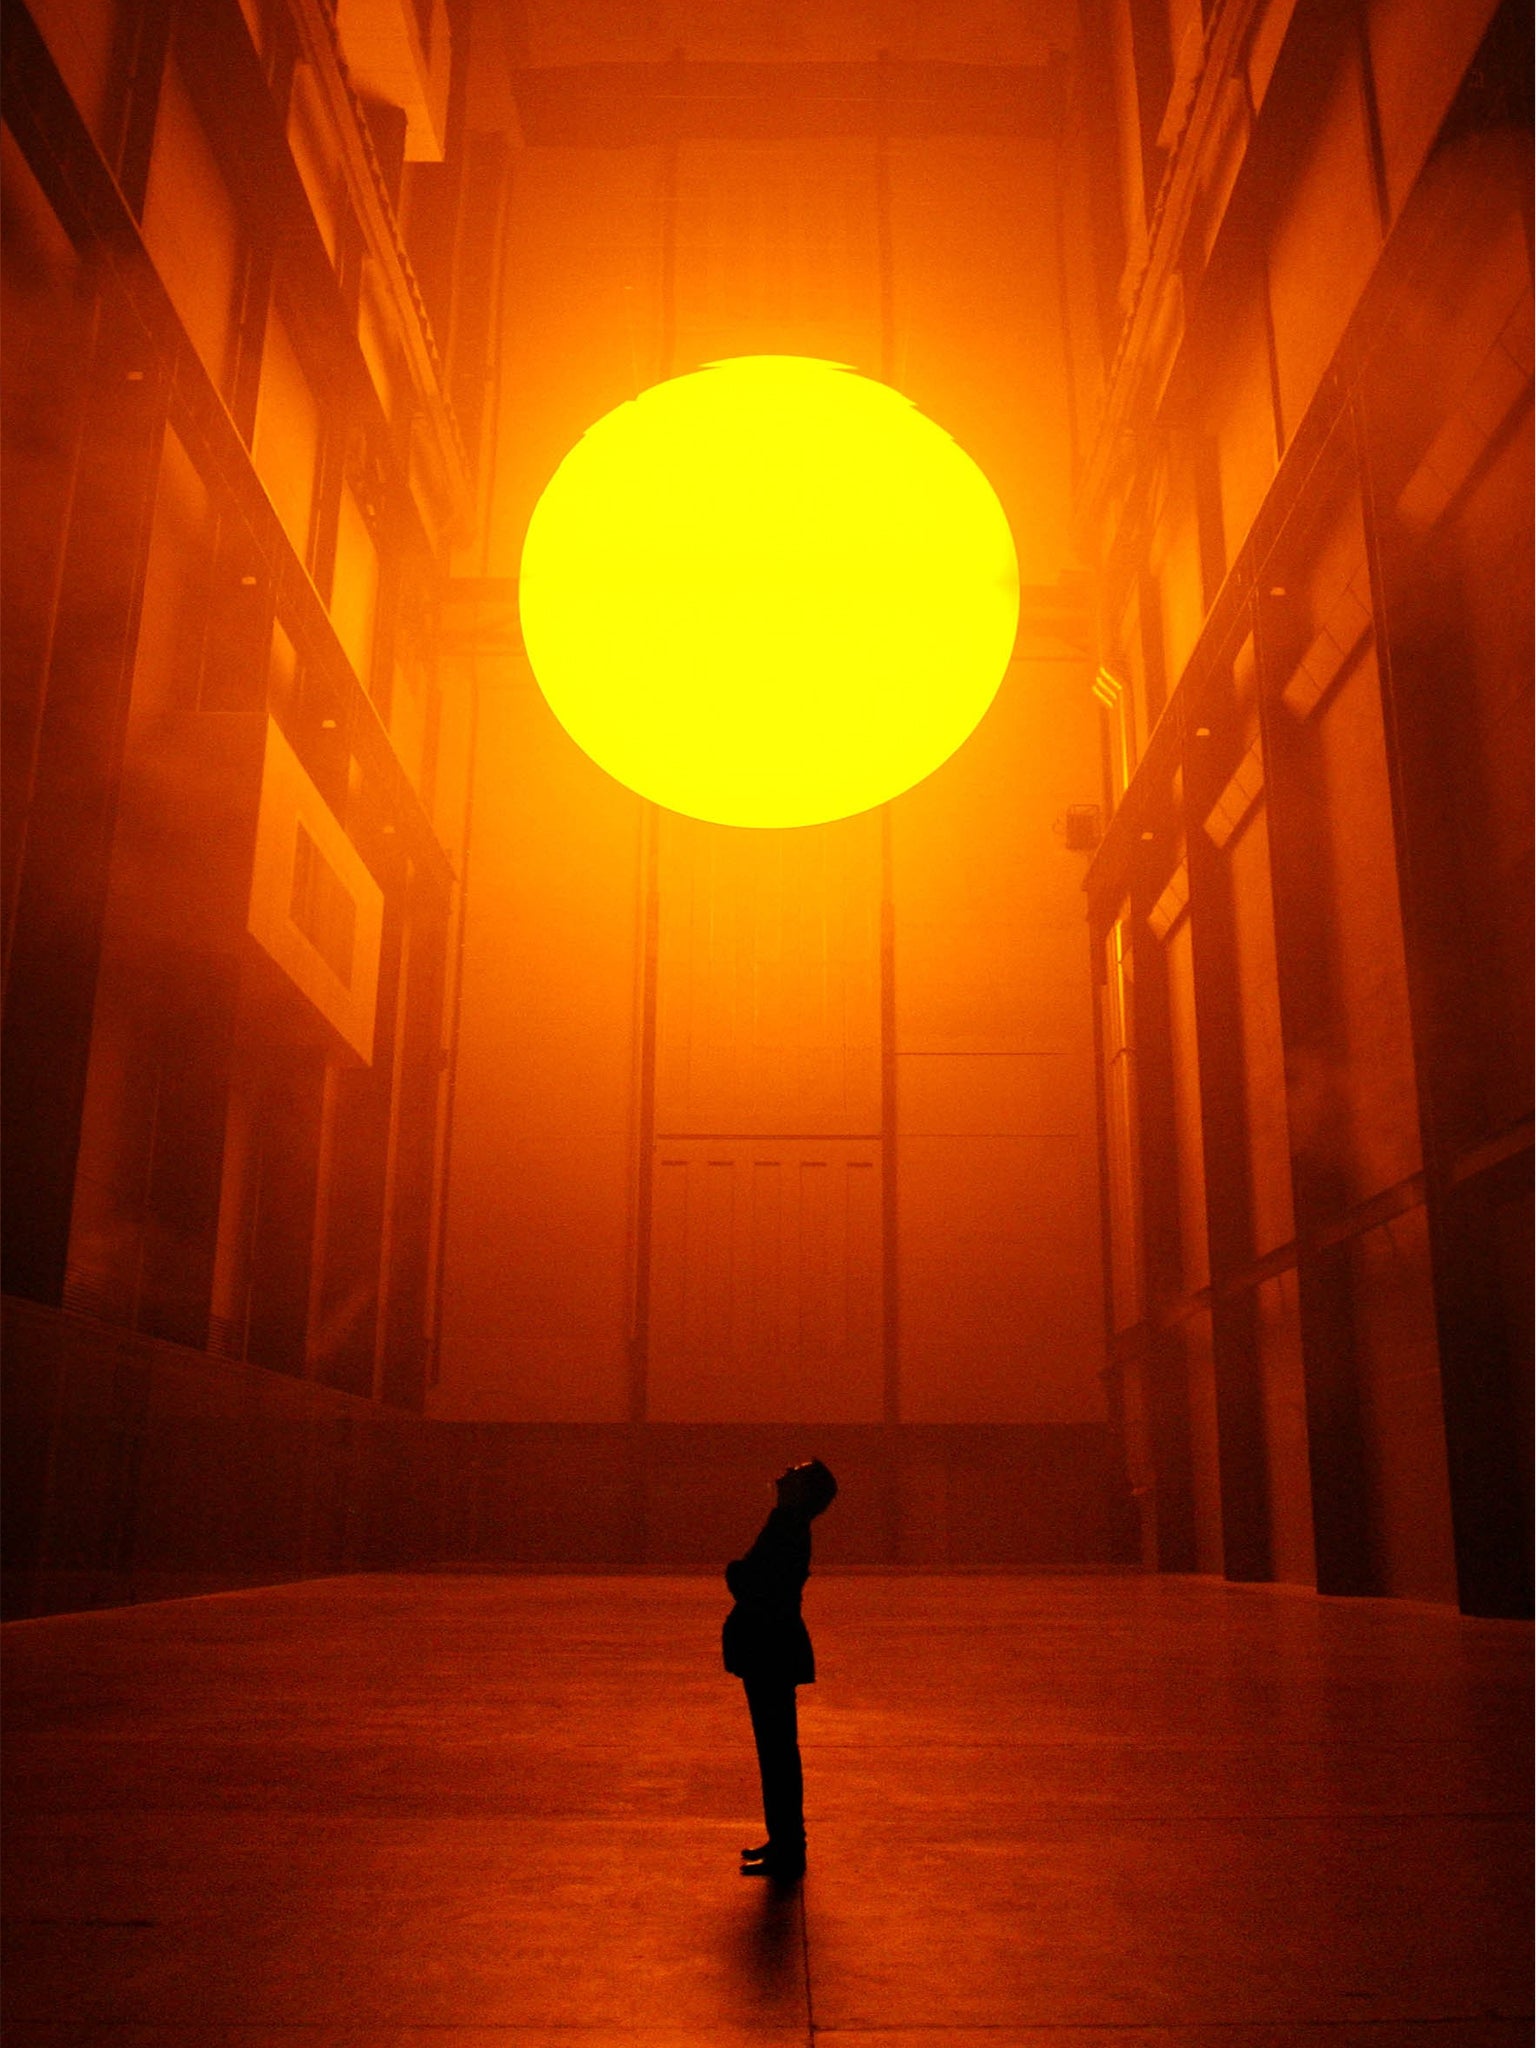 Eliasson's 'The Weather Project' at Tate Modern in 2003